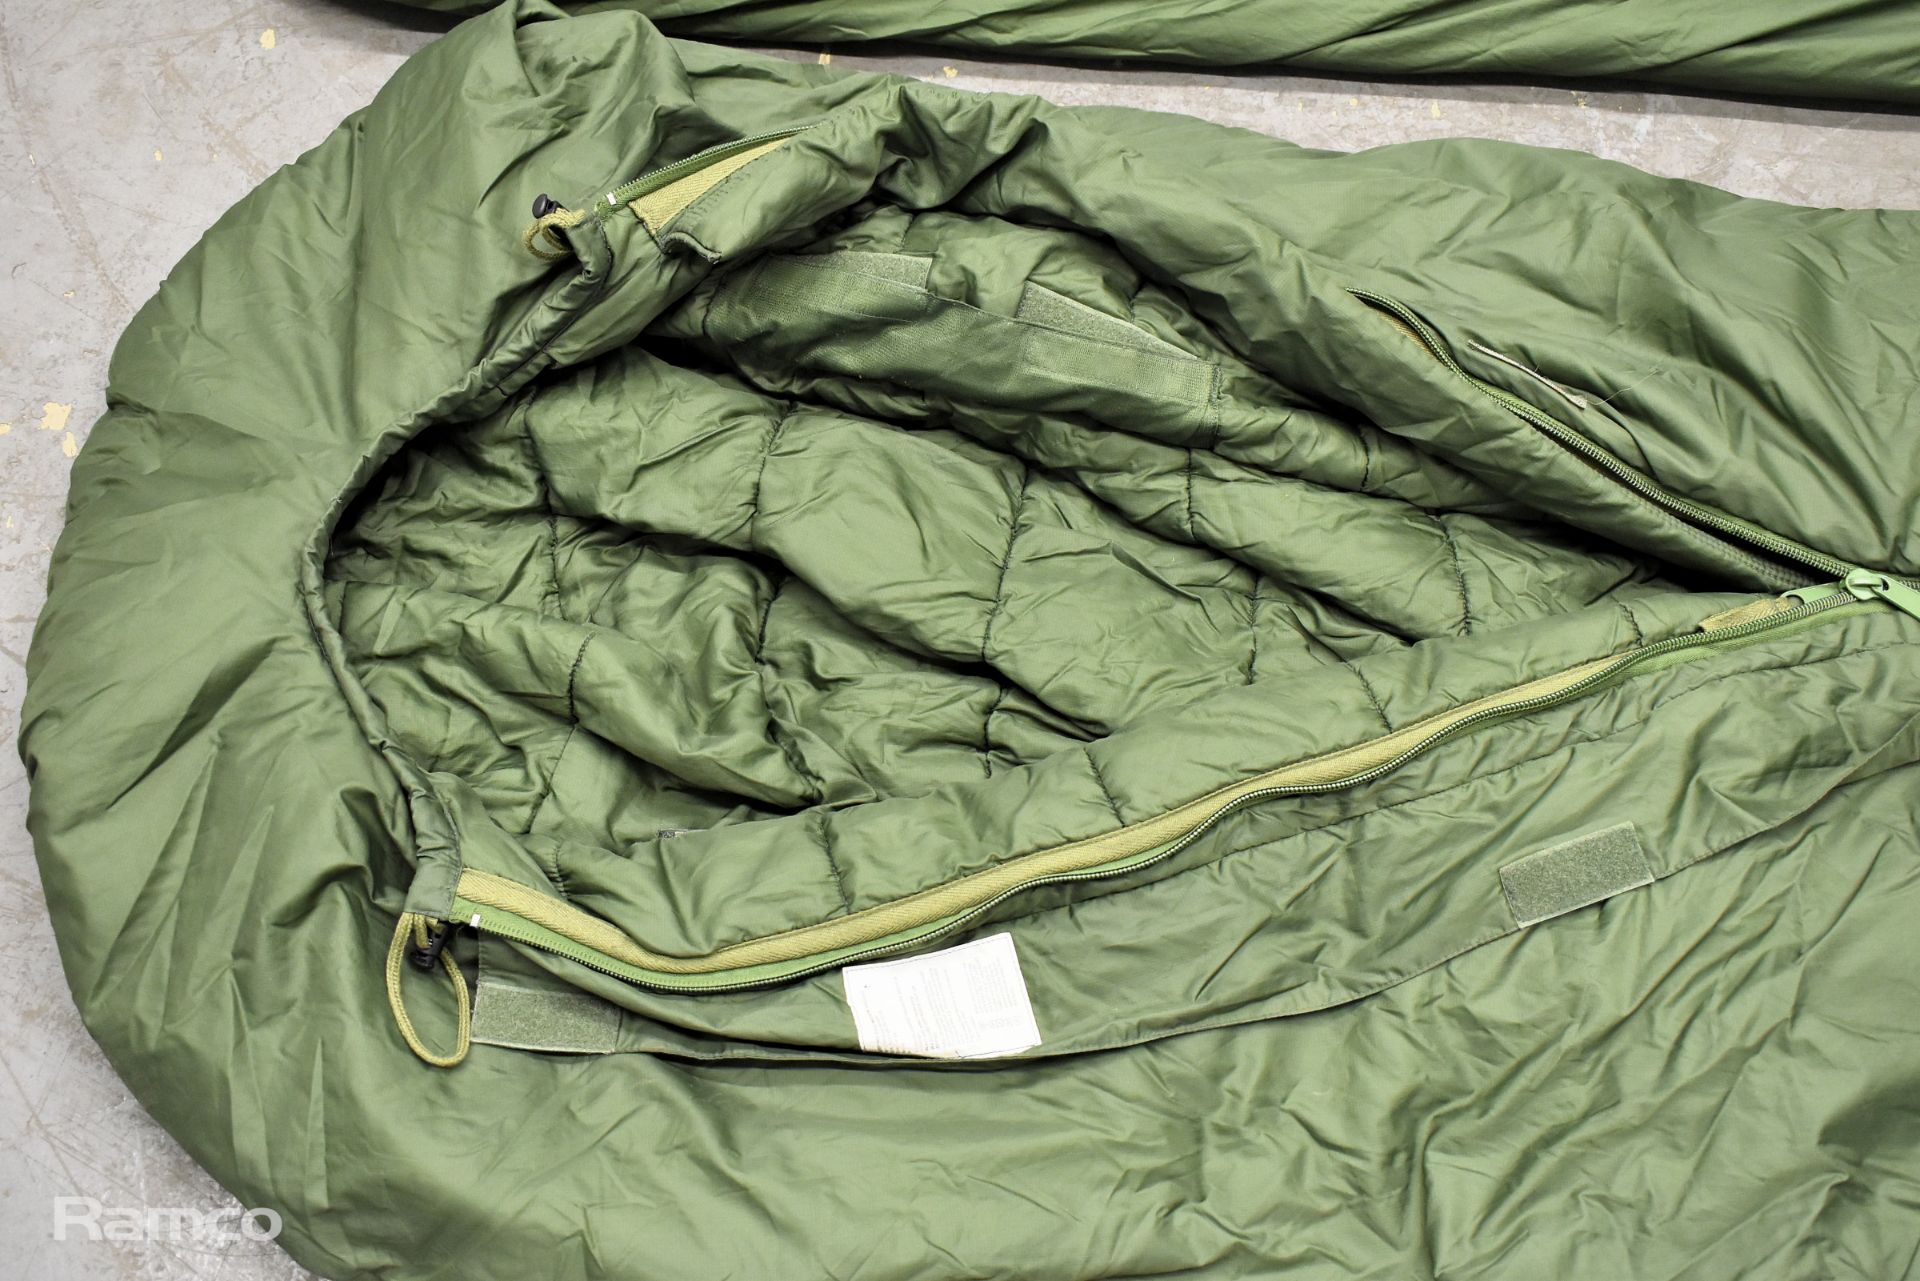 50x Sleeping bags - mixed grades and sizes - Image 7 of 8